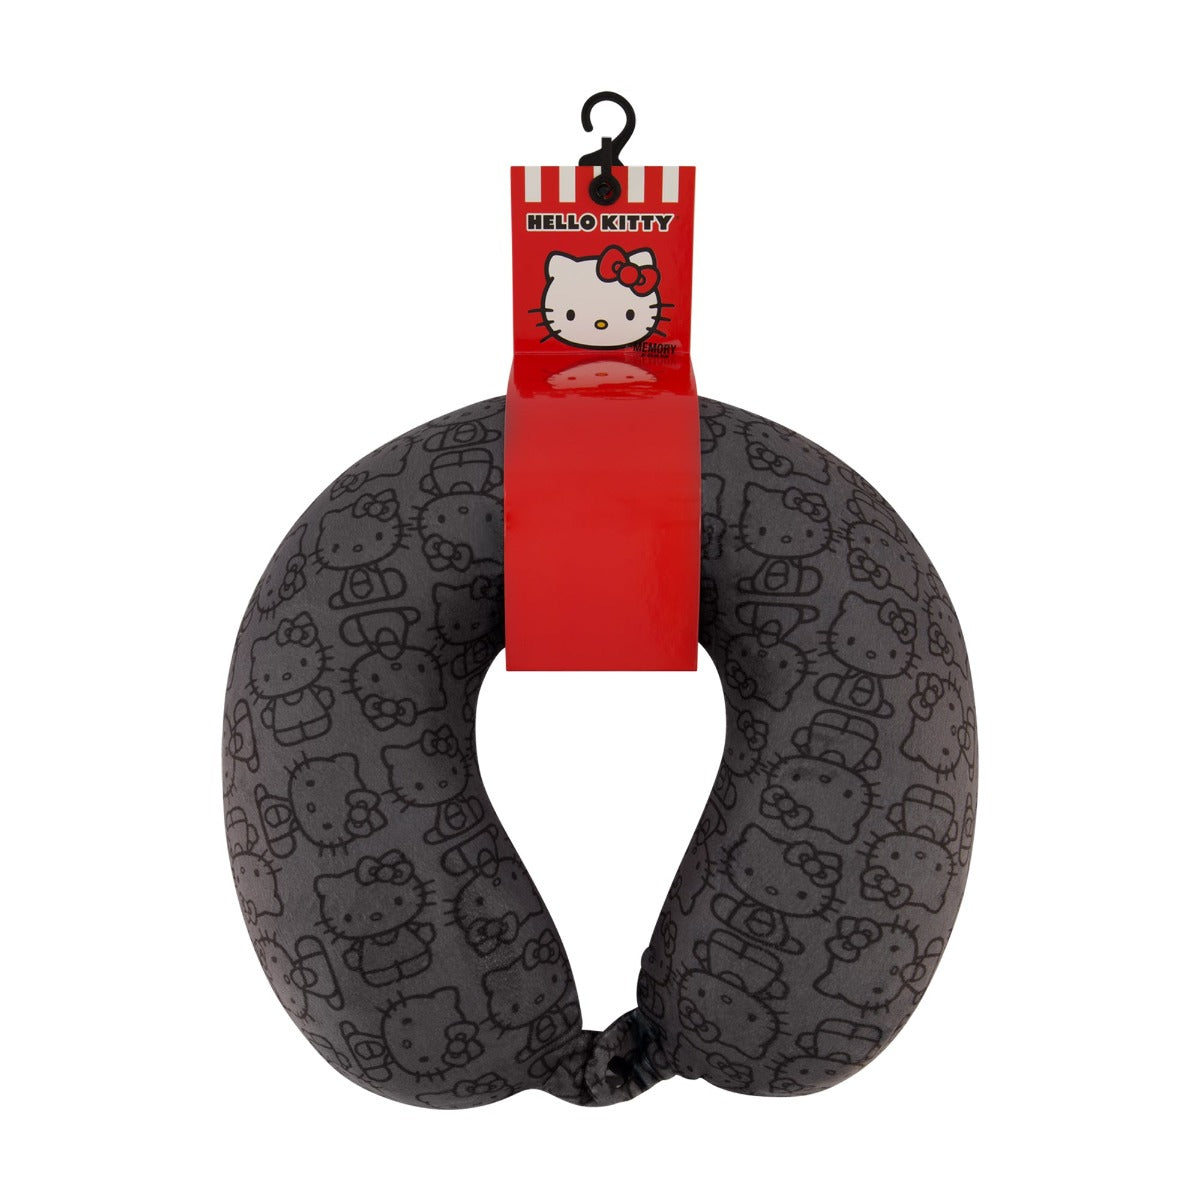 Black Ful Hello Kitty all over icon memory foam travel pillow - best neck pillows for traveling